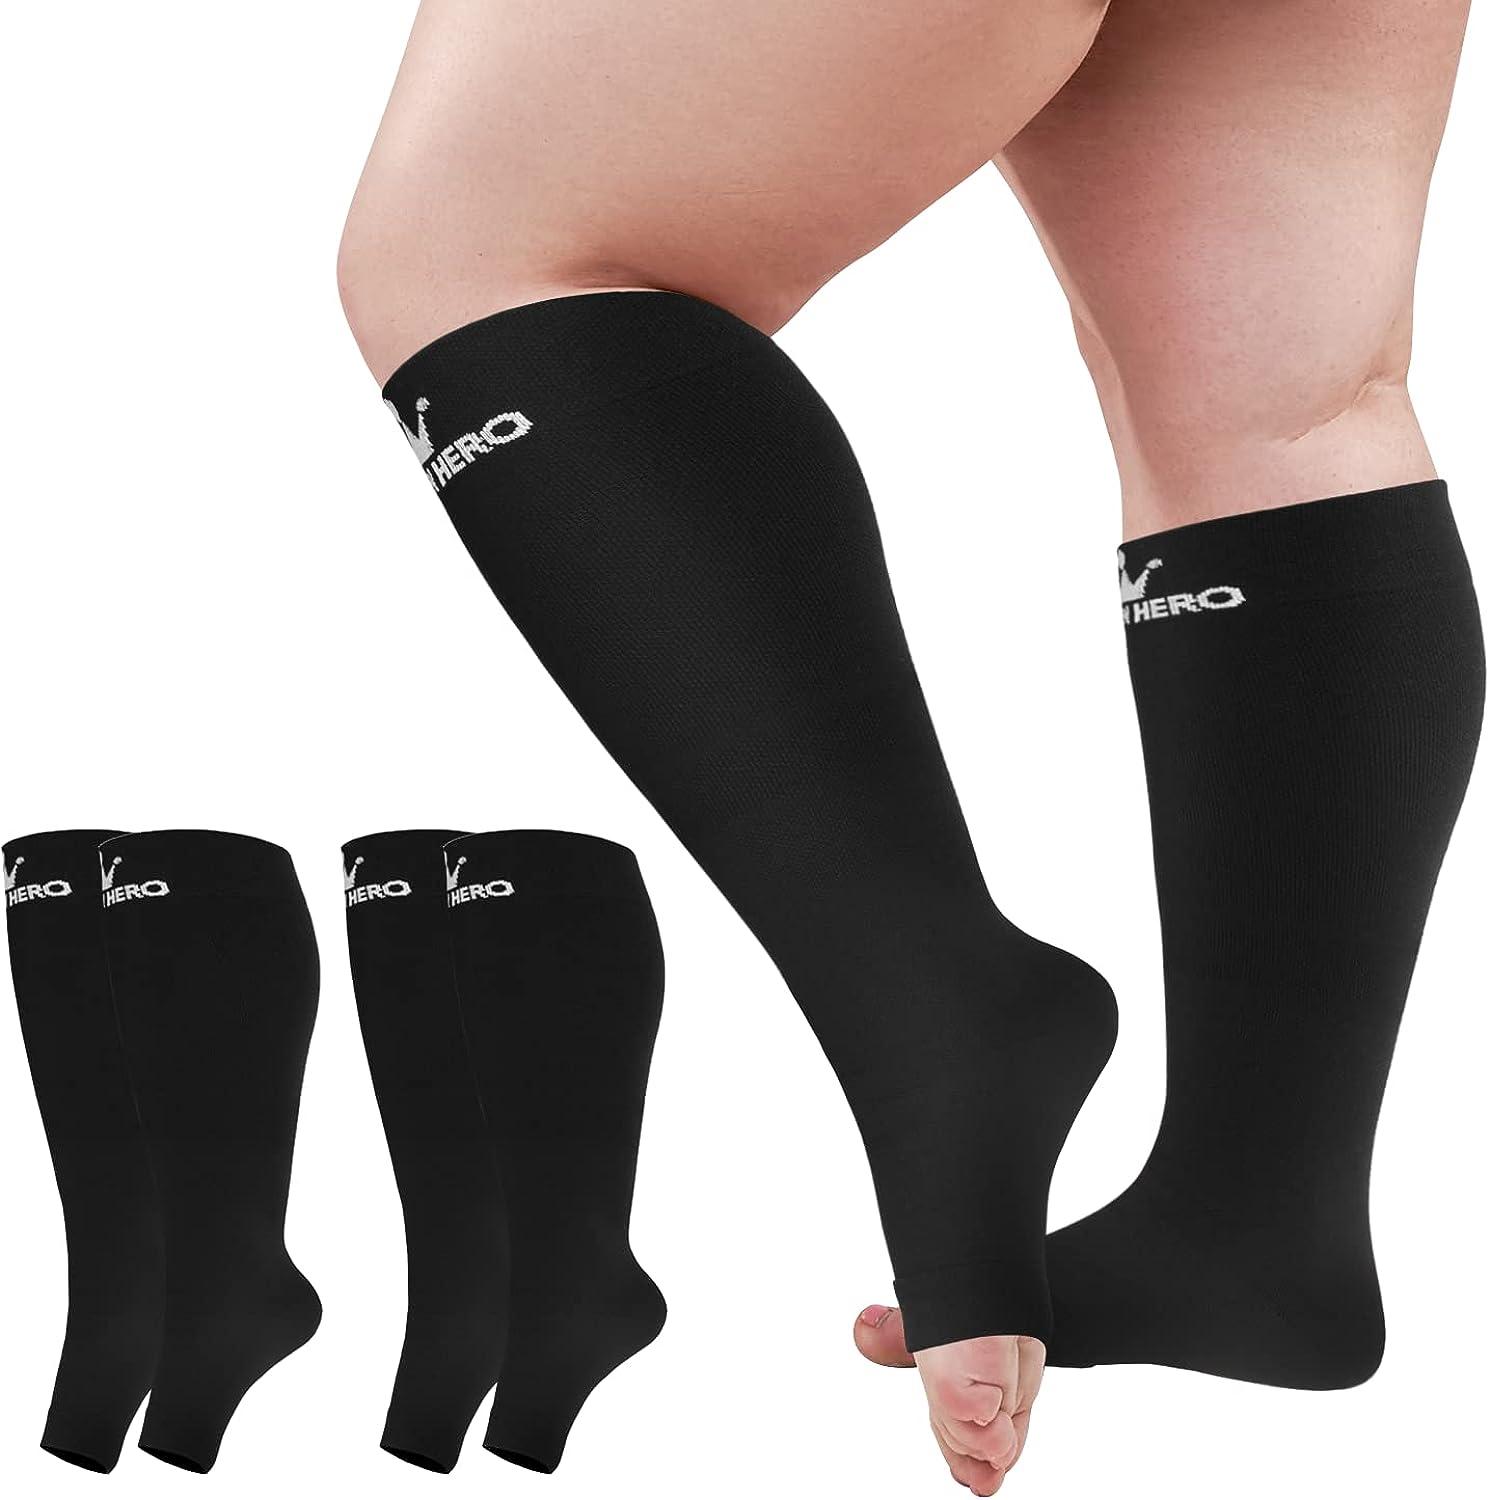 3XL Plus Size Wide Calf Support Socks for Men & Women Circulation 20-30mmHg  - Opaque Compression Socks with Open Toe for Varicose Veins Circulation,  Lymphedema, Arthritis by Mojo - Black, 3X-Large 